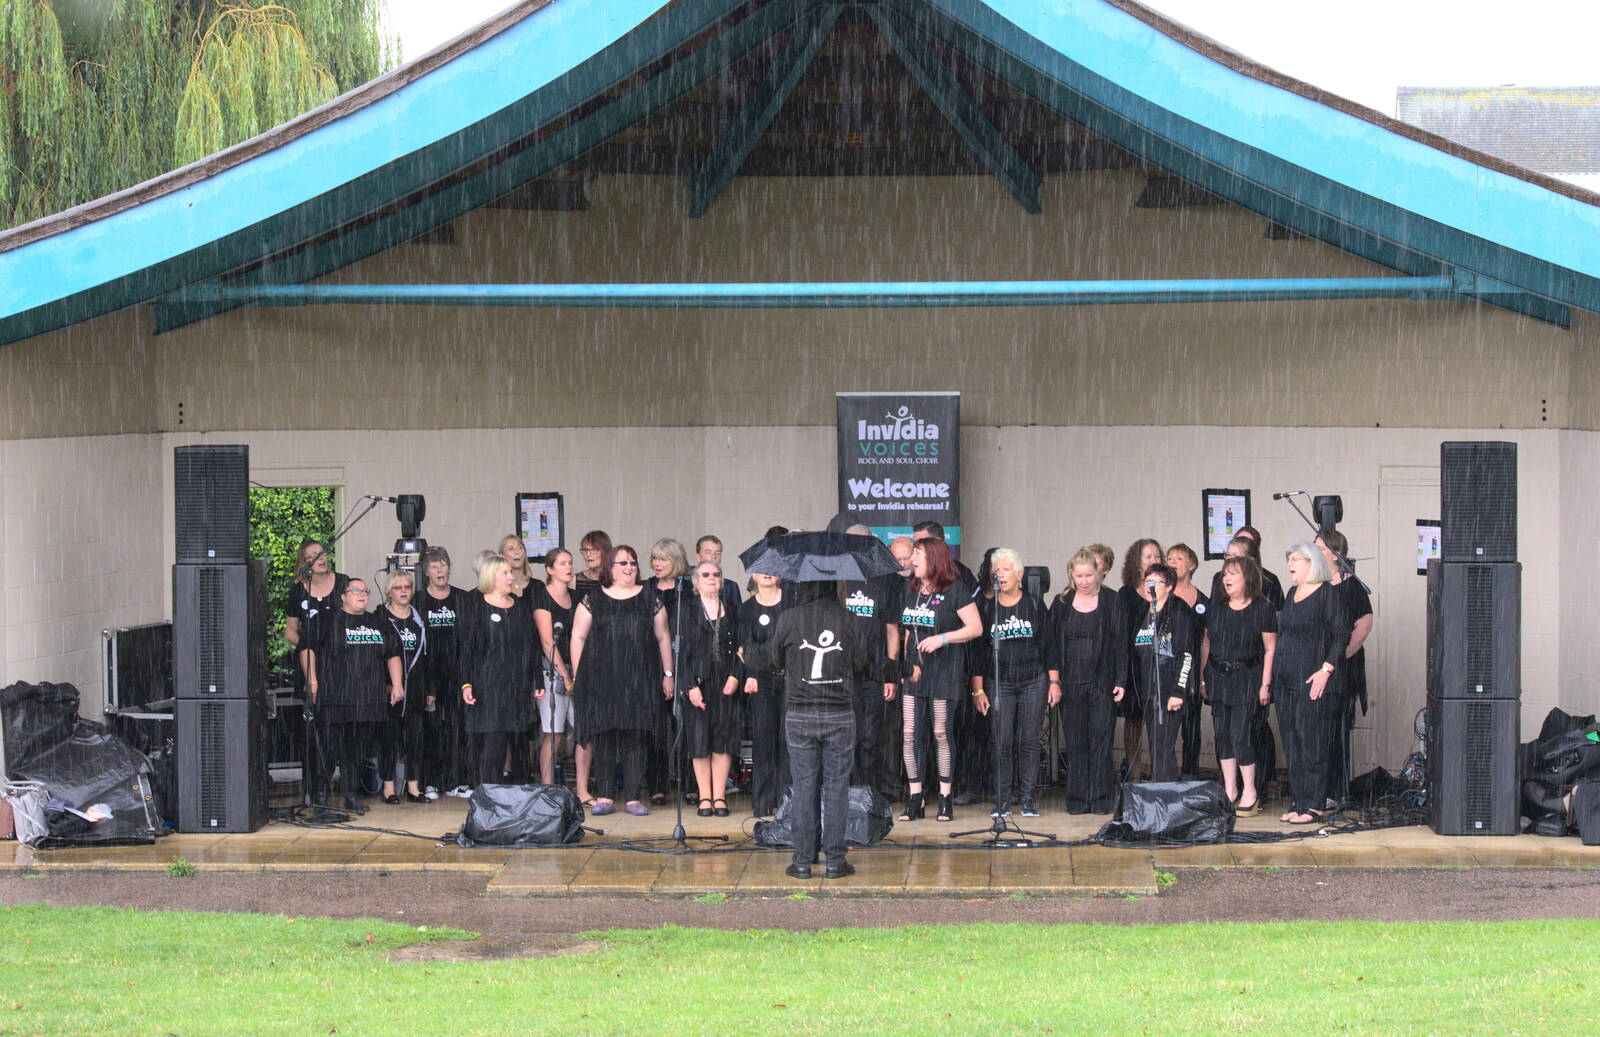 The rain lashes down from Diss Fest, or Singin' in the Rain, Diss, Norfolk - 23rd July 2017